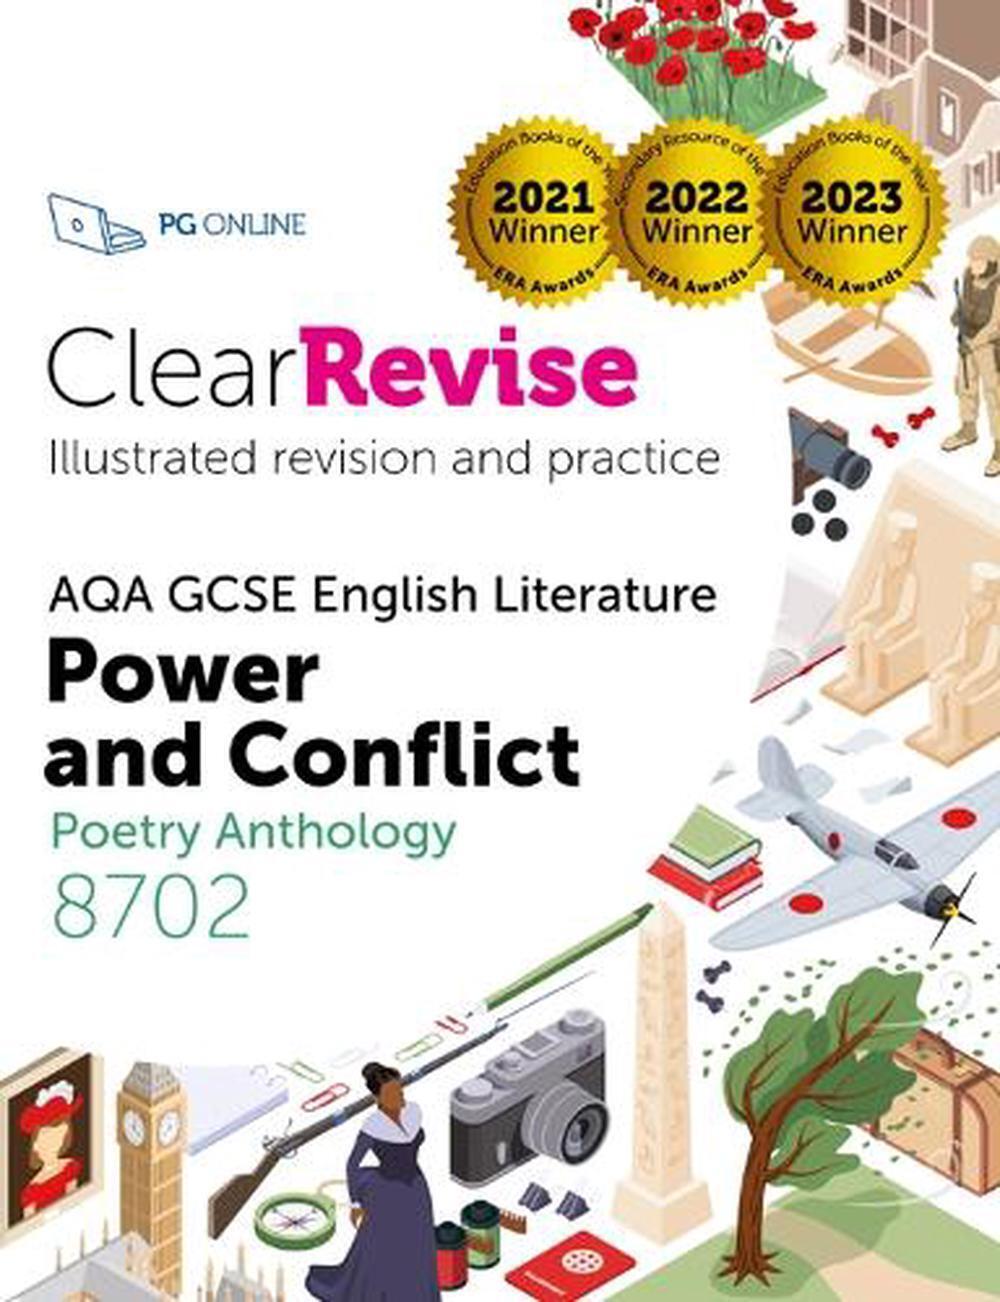 ClearRevise AQA GCSE English Literature: Power and conflict by PG Online Paperba